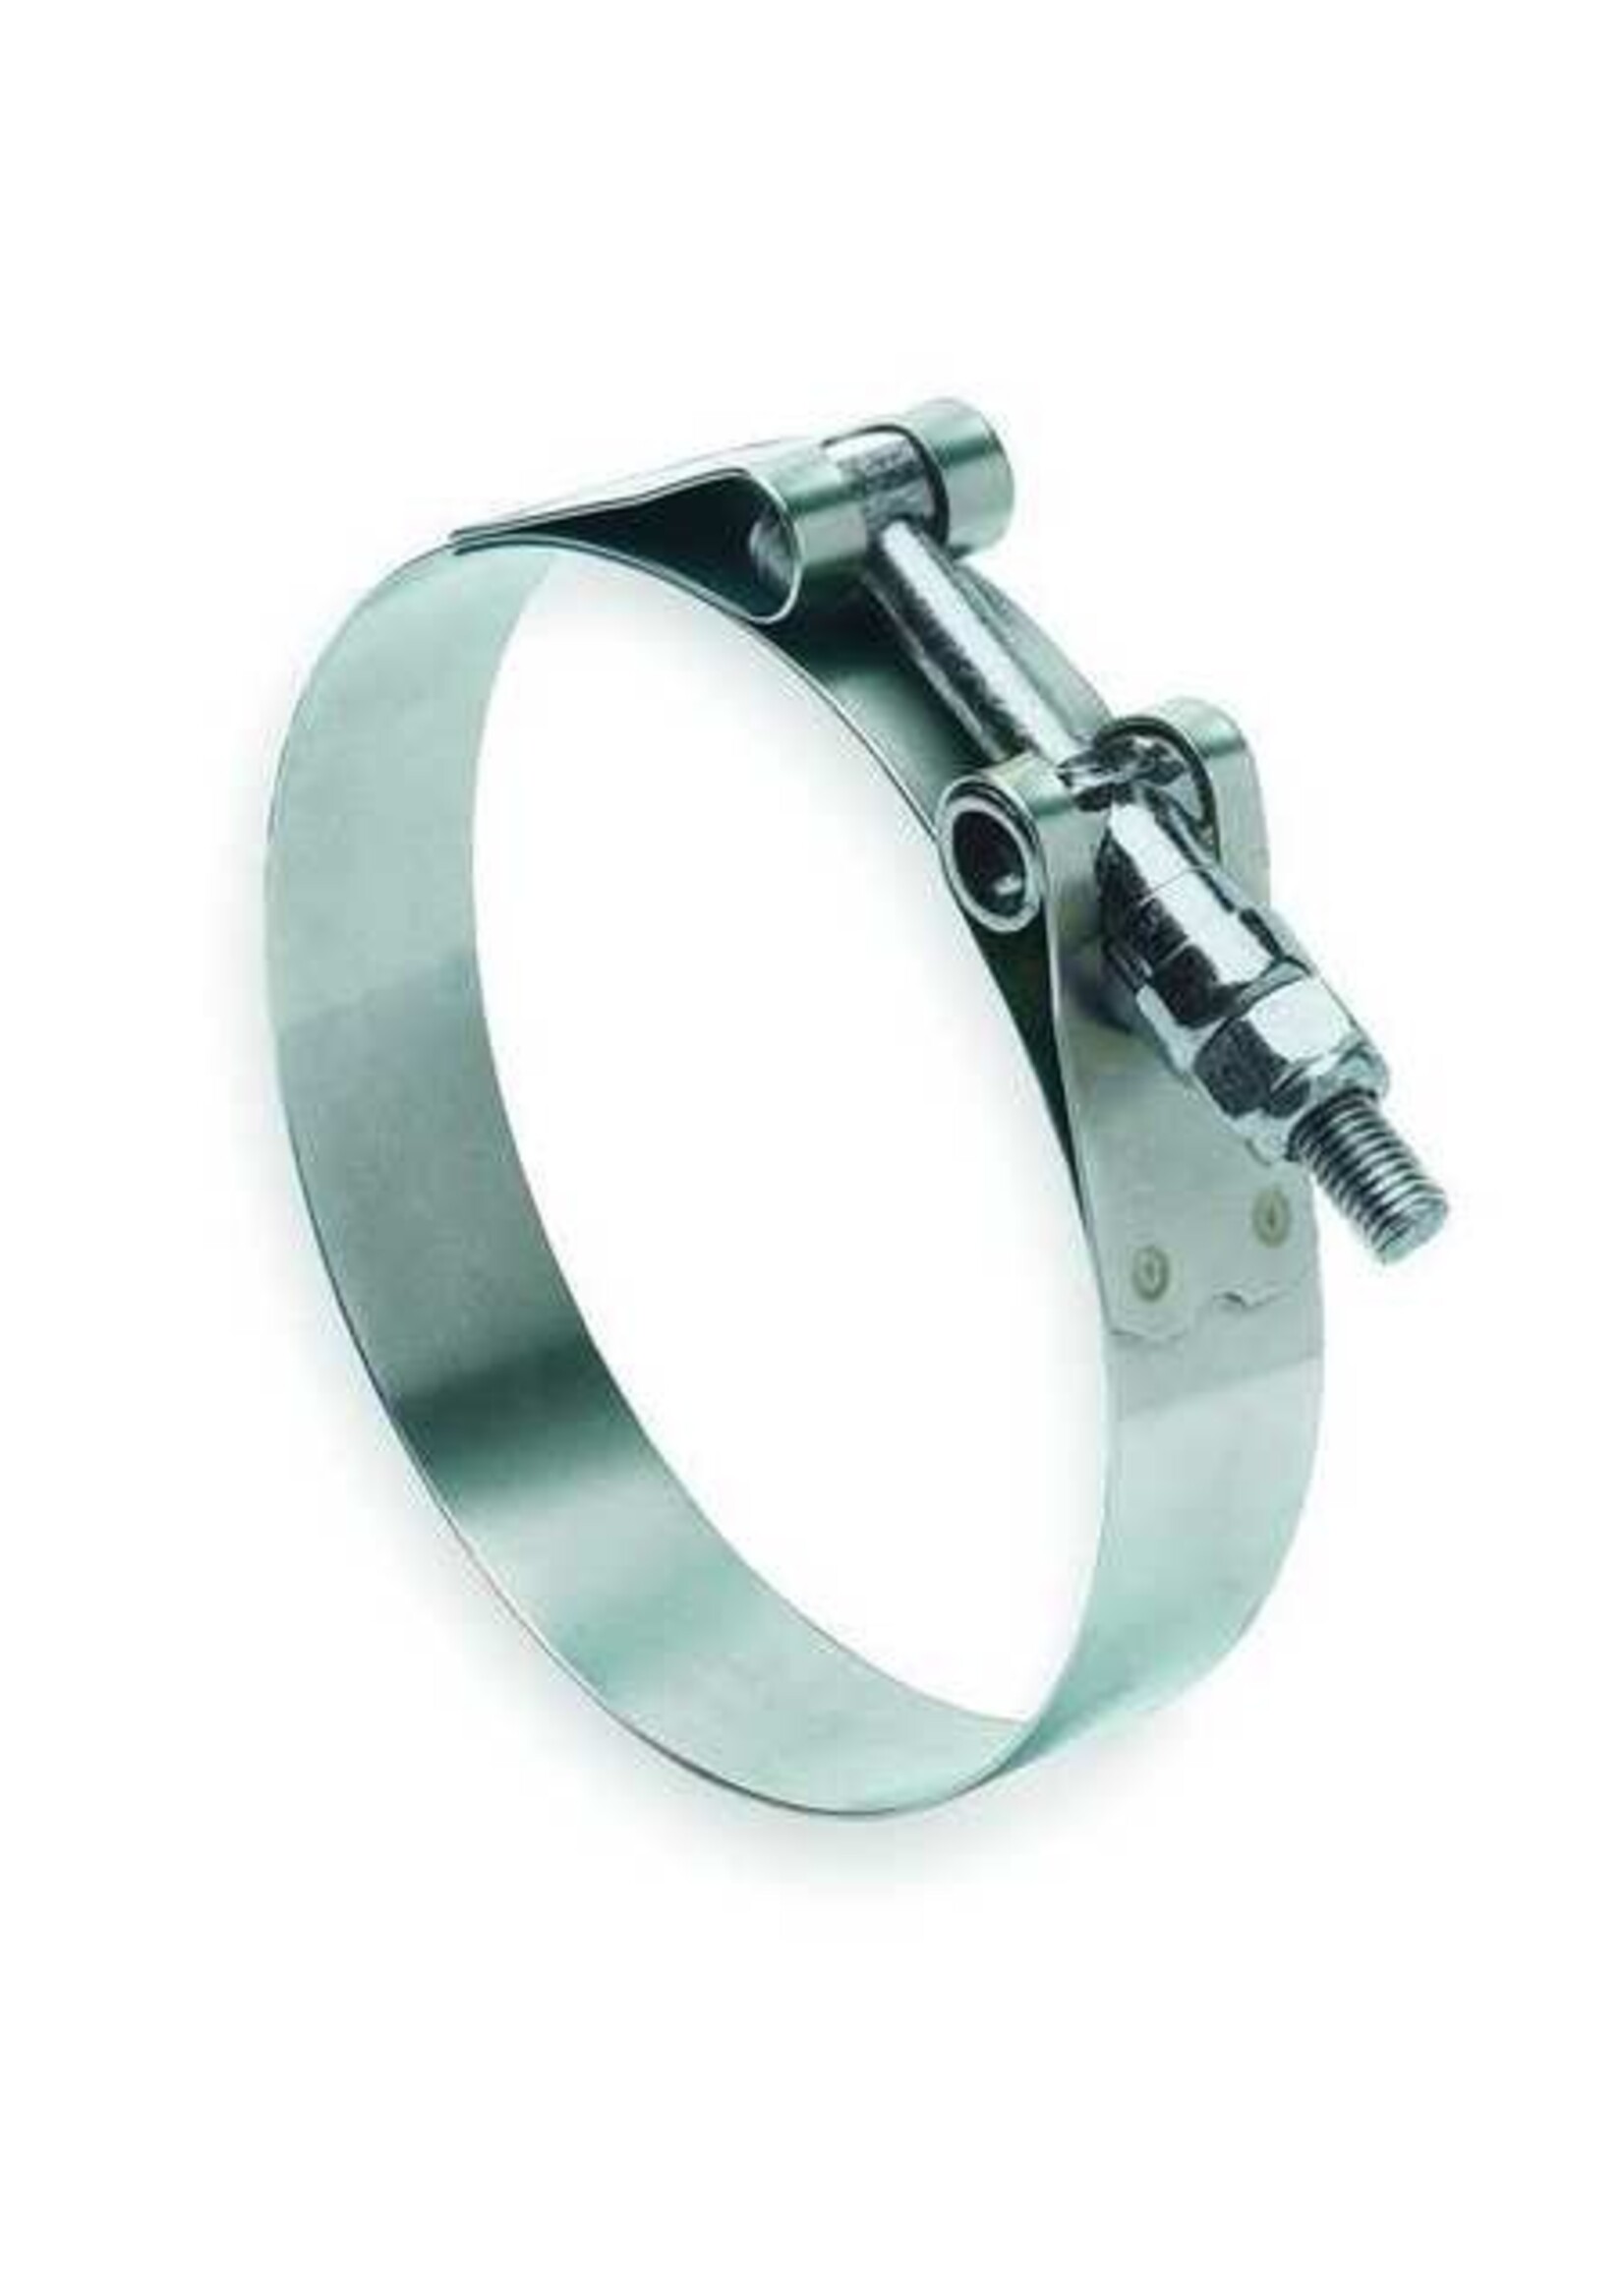 T Bolt Clamp